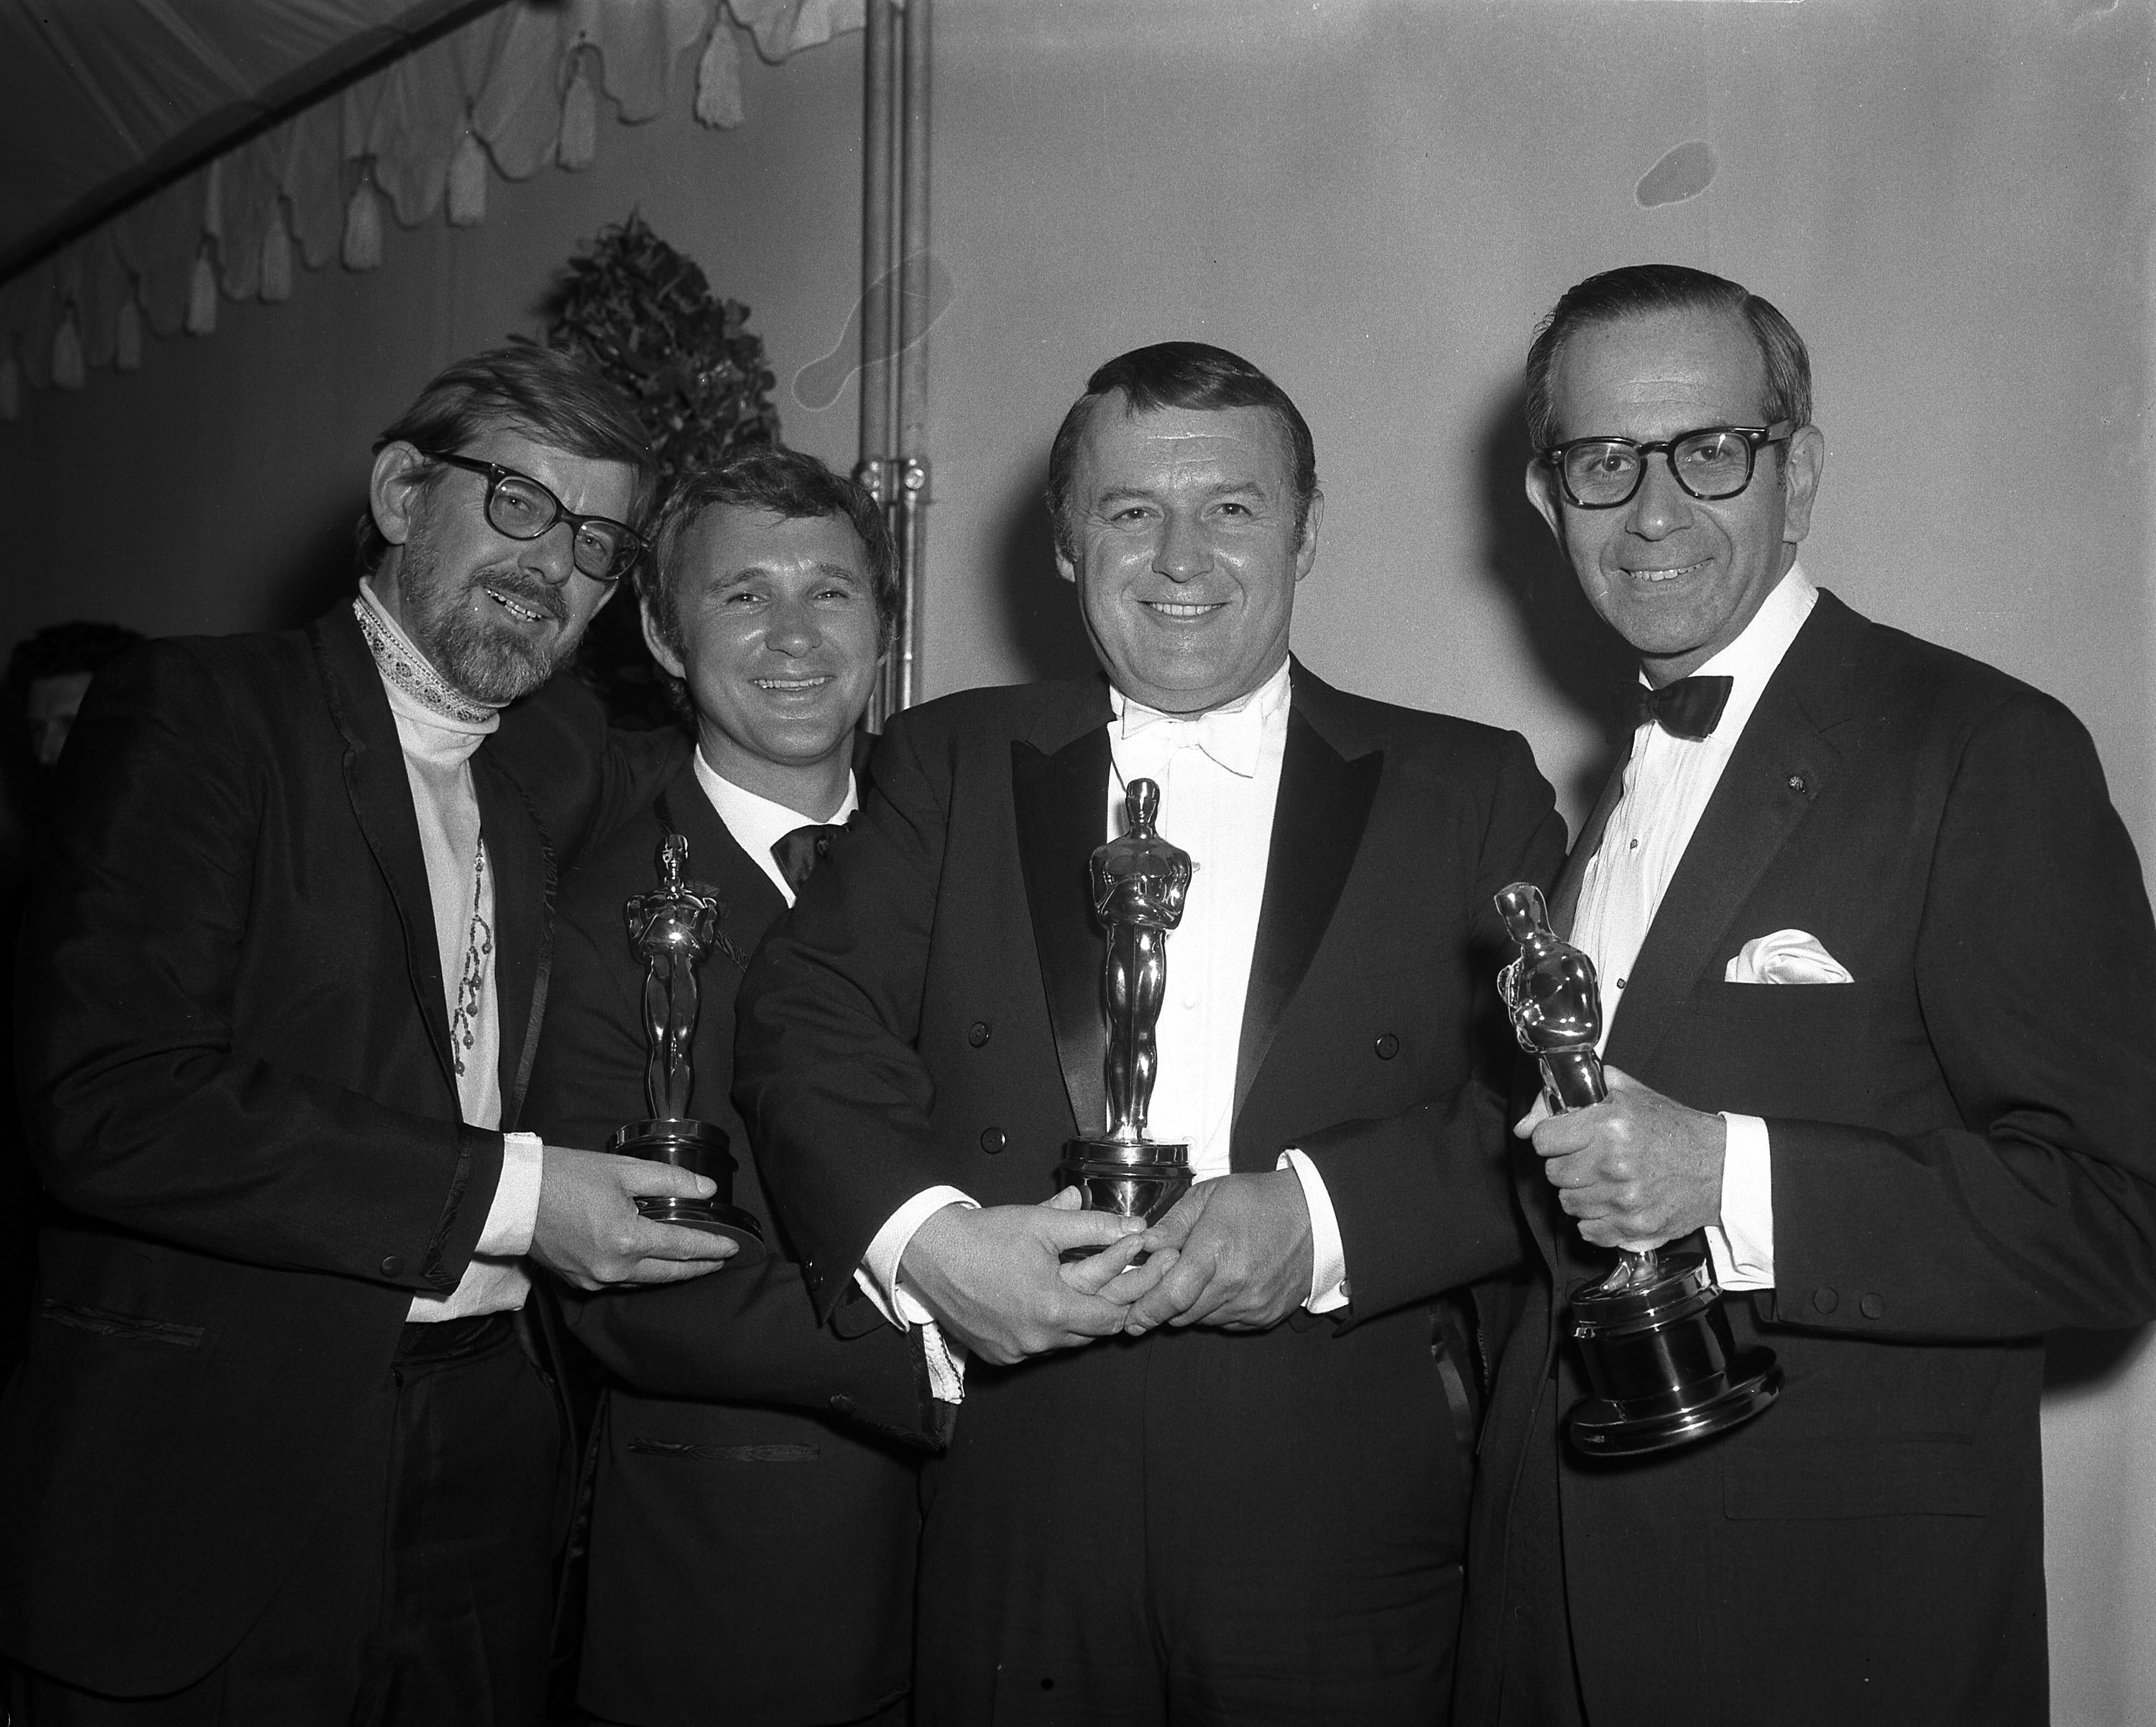 1968 | Oscars.org | Academy of Motion Picture Arts and Sciences3000 x 2403